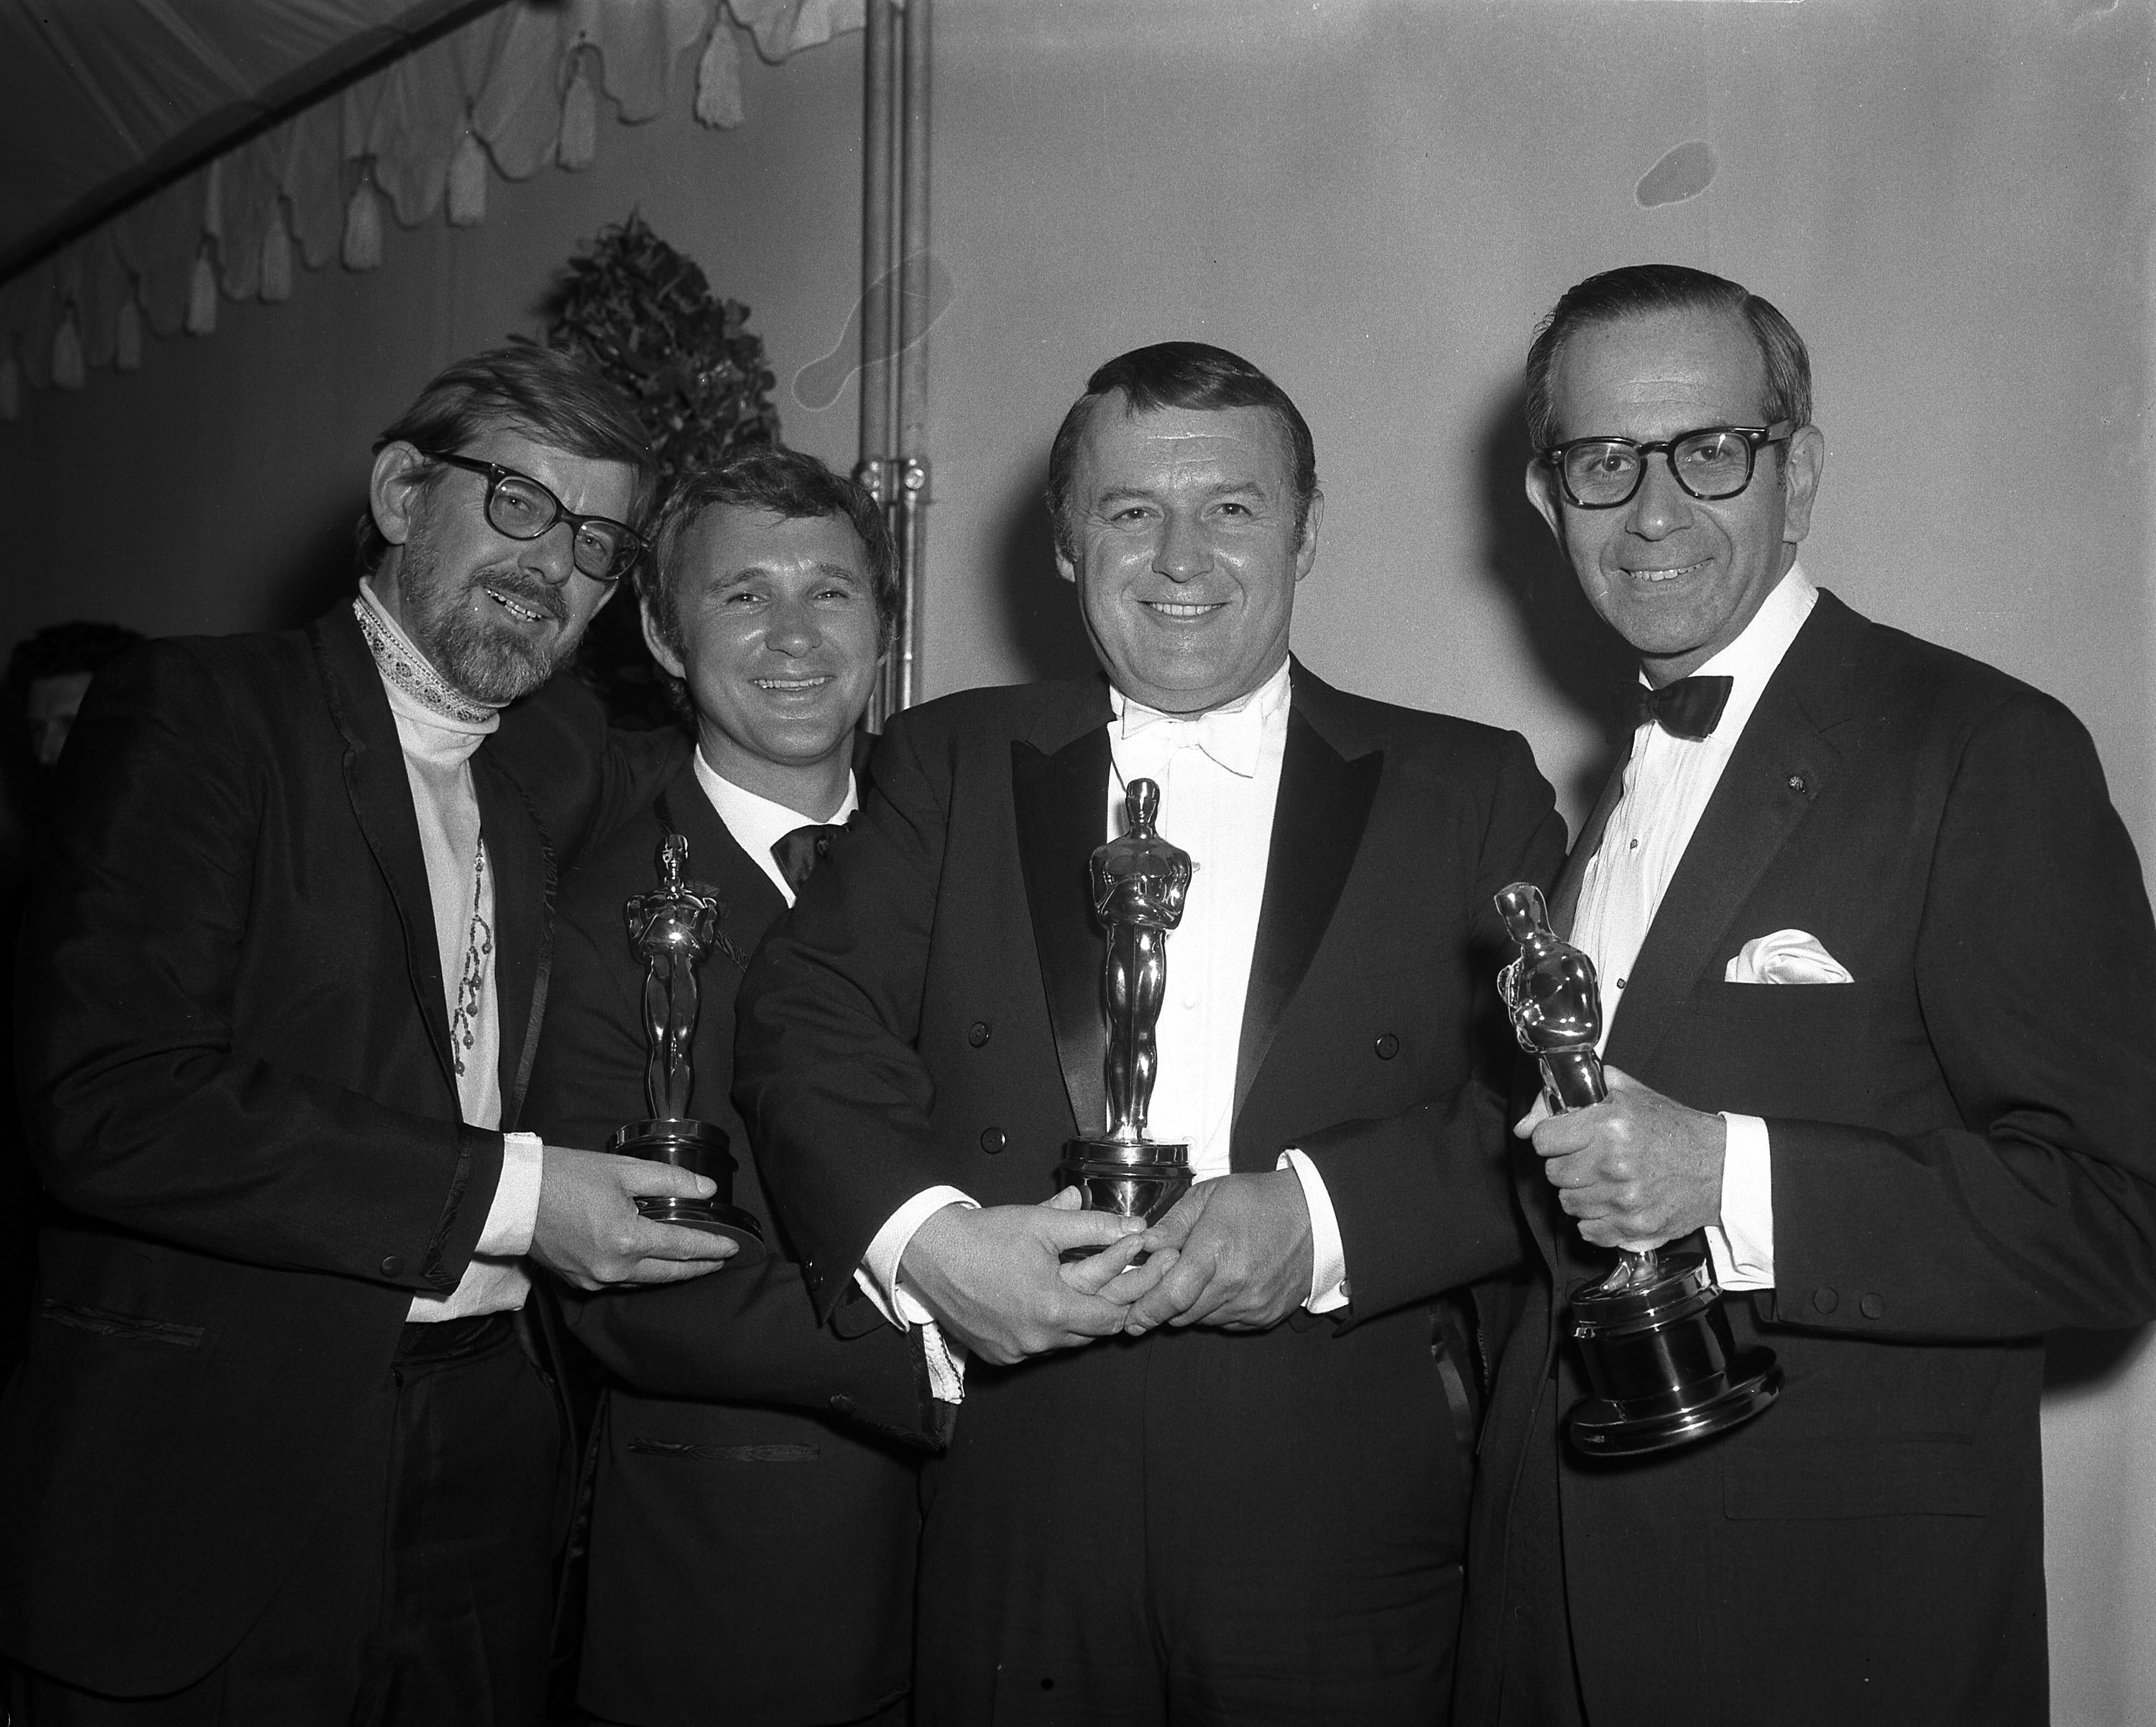 1968 | Oscars.org | Academy of Motion Picture Arts and Sciences3000 x 2403